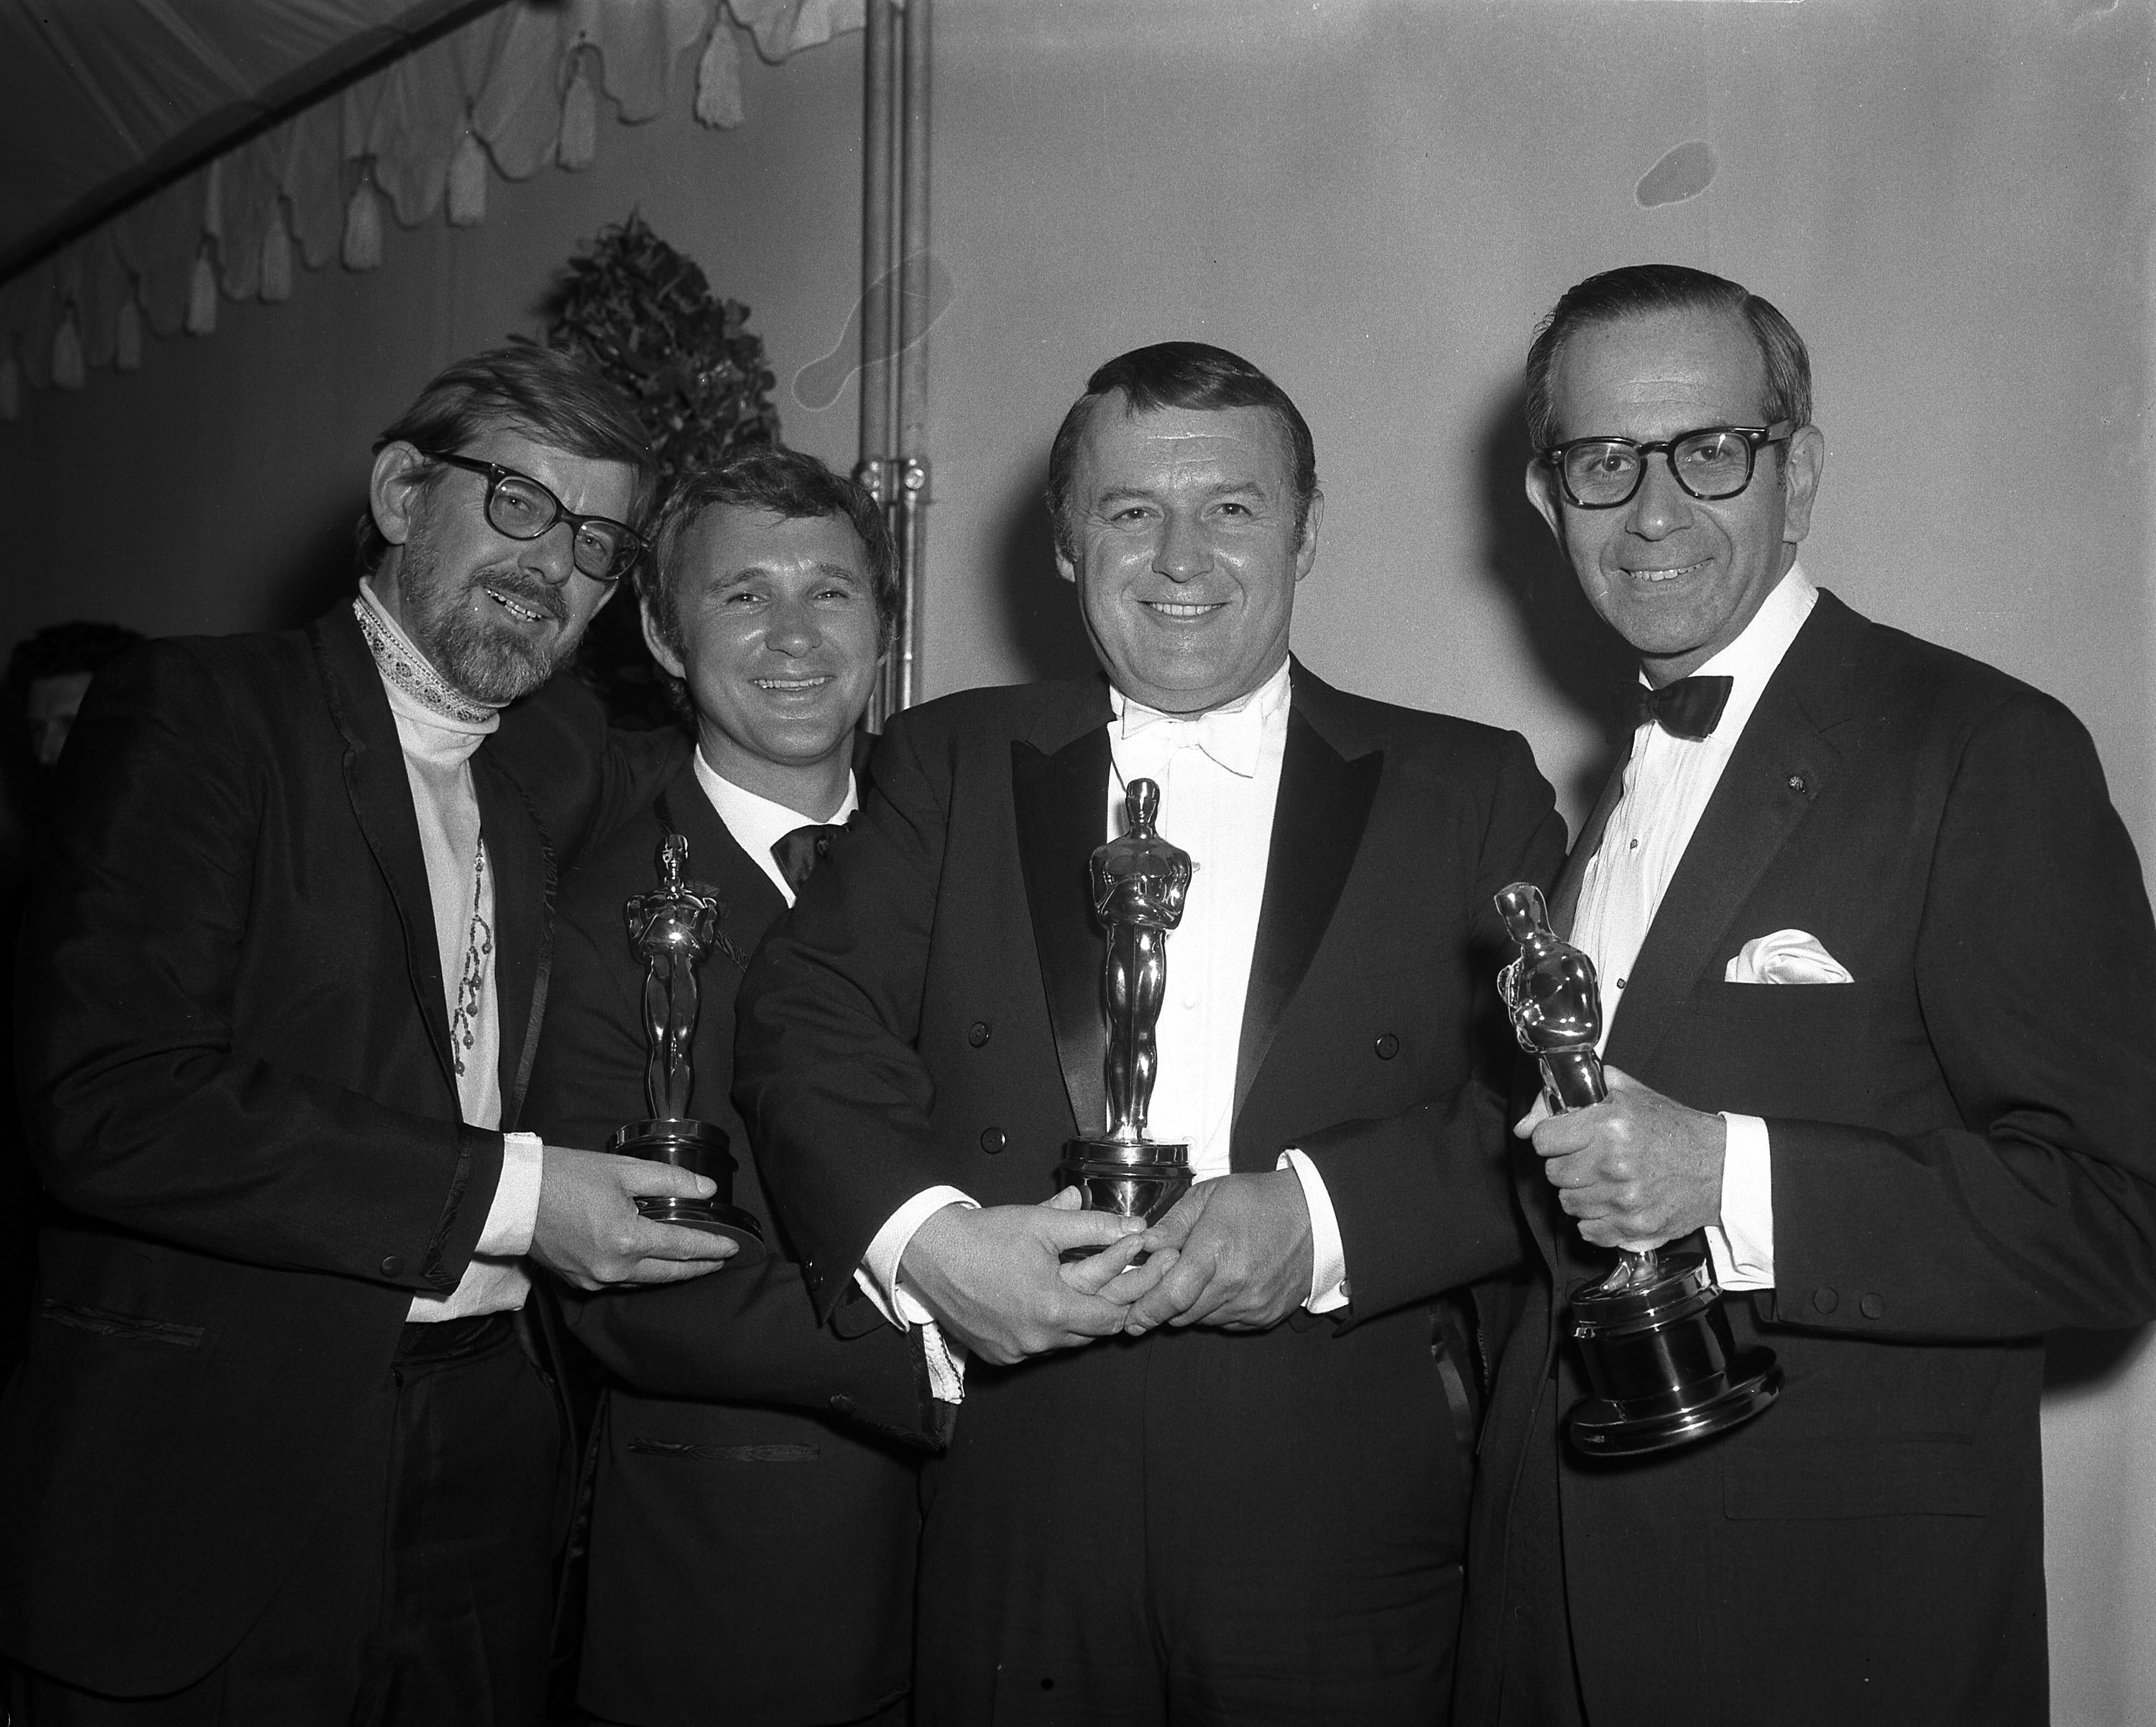 1968 | Oscars.org | Academy of Motion Picture Arts and Sciences3000 x 2403